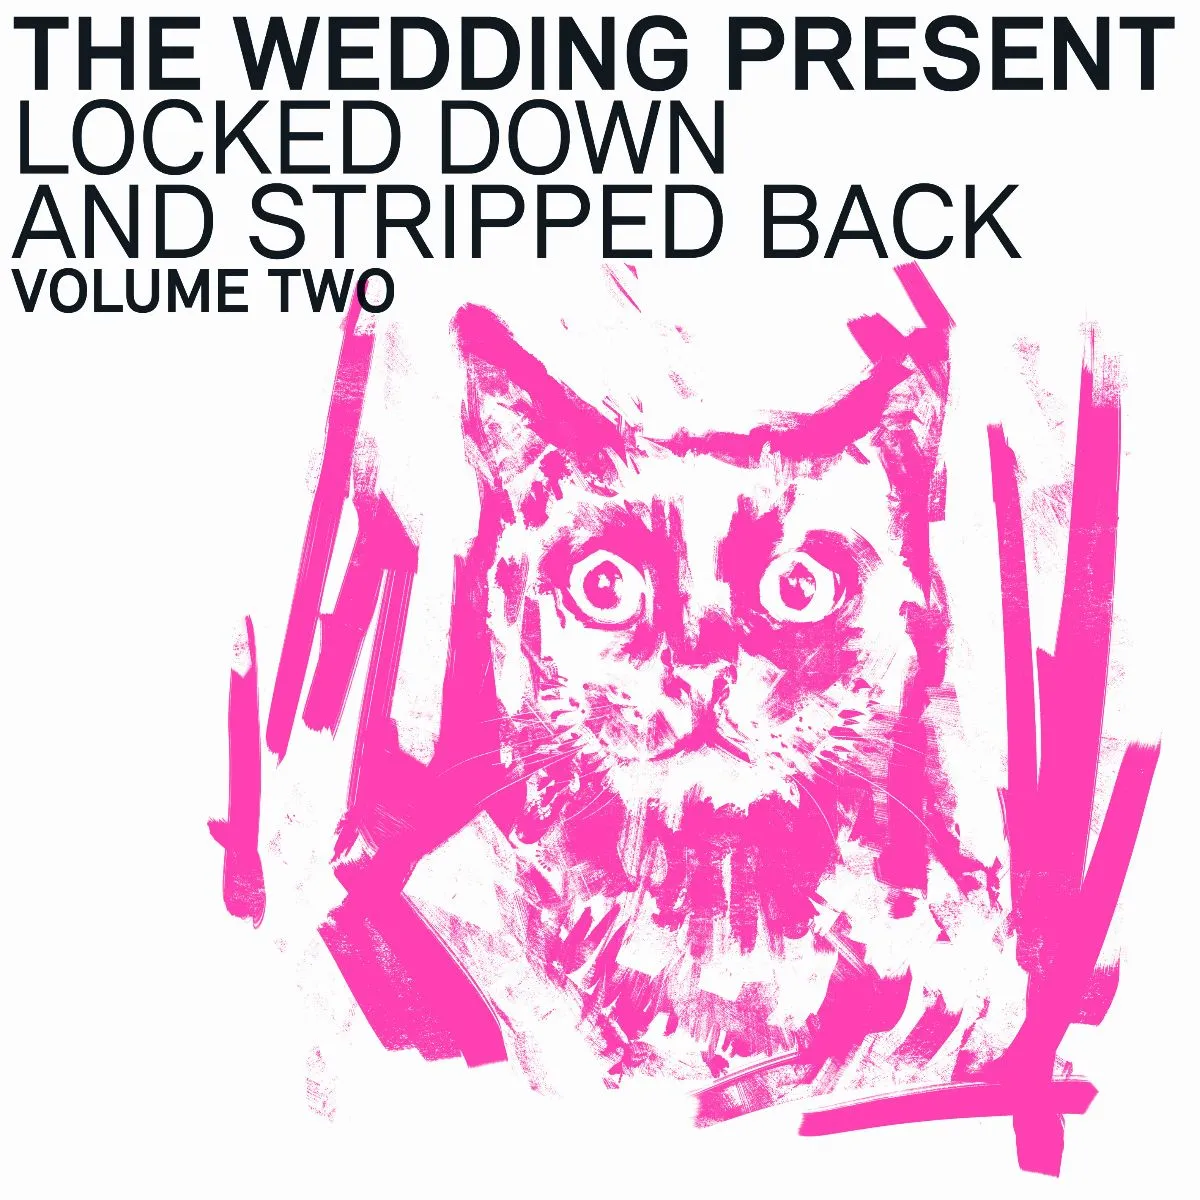 <strong>The Wedding Present - Locked Down and Stripped Back Volume Two</strong> (Vinyl LP - pink)